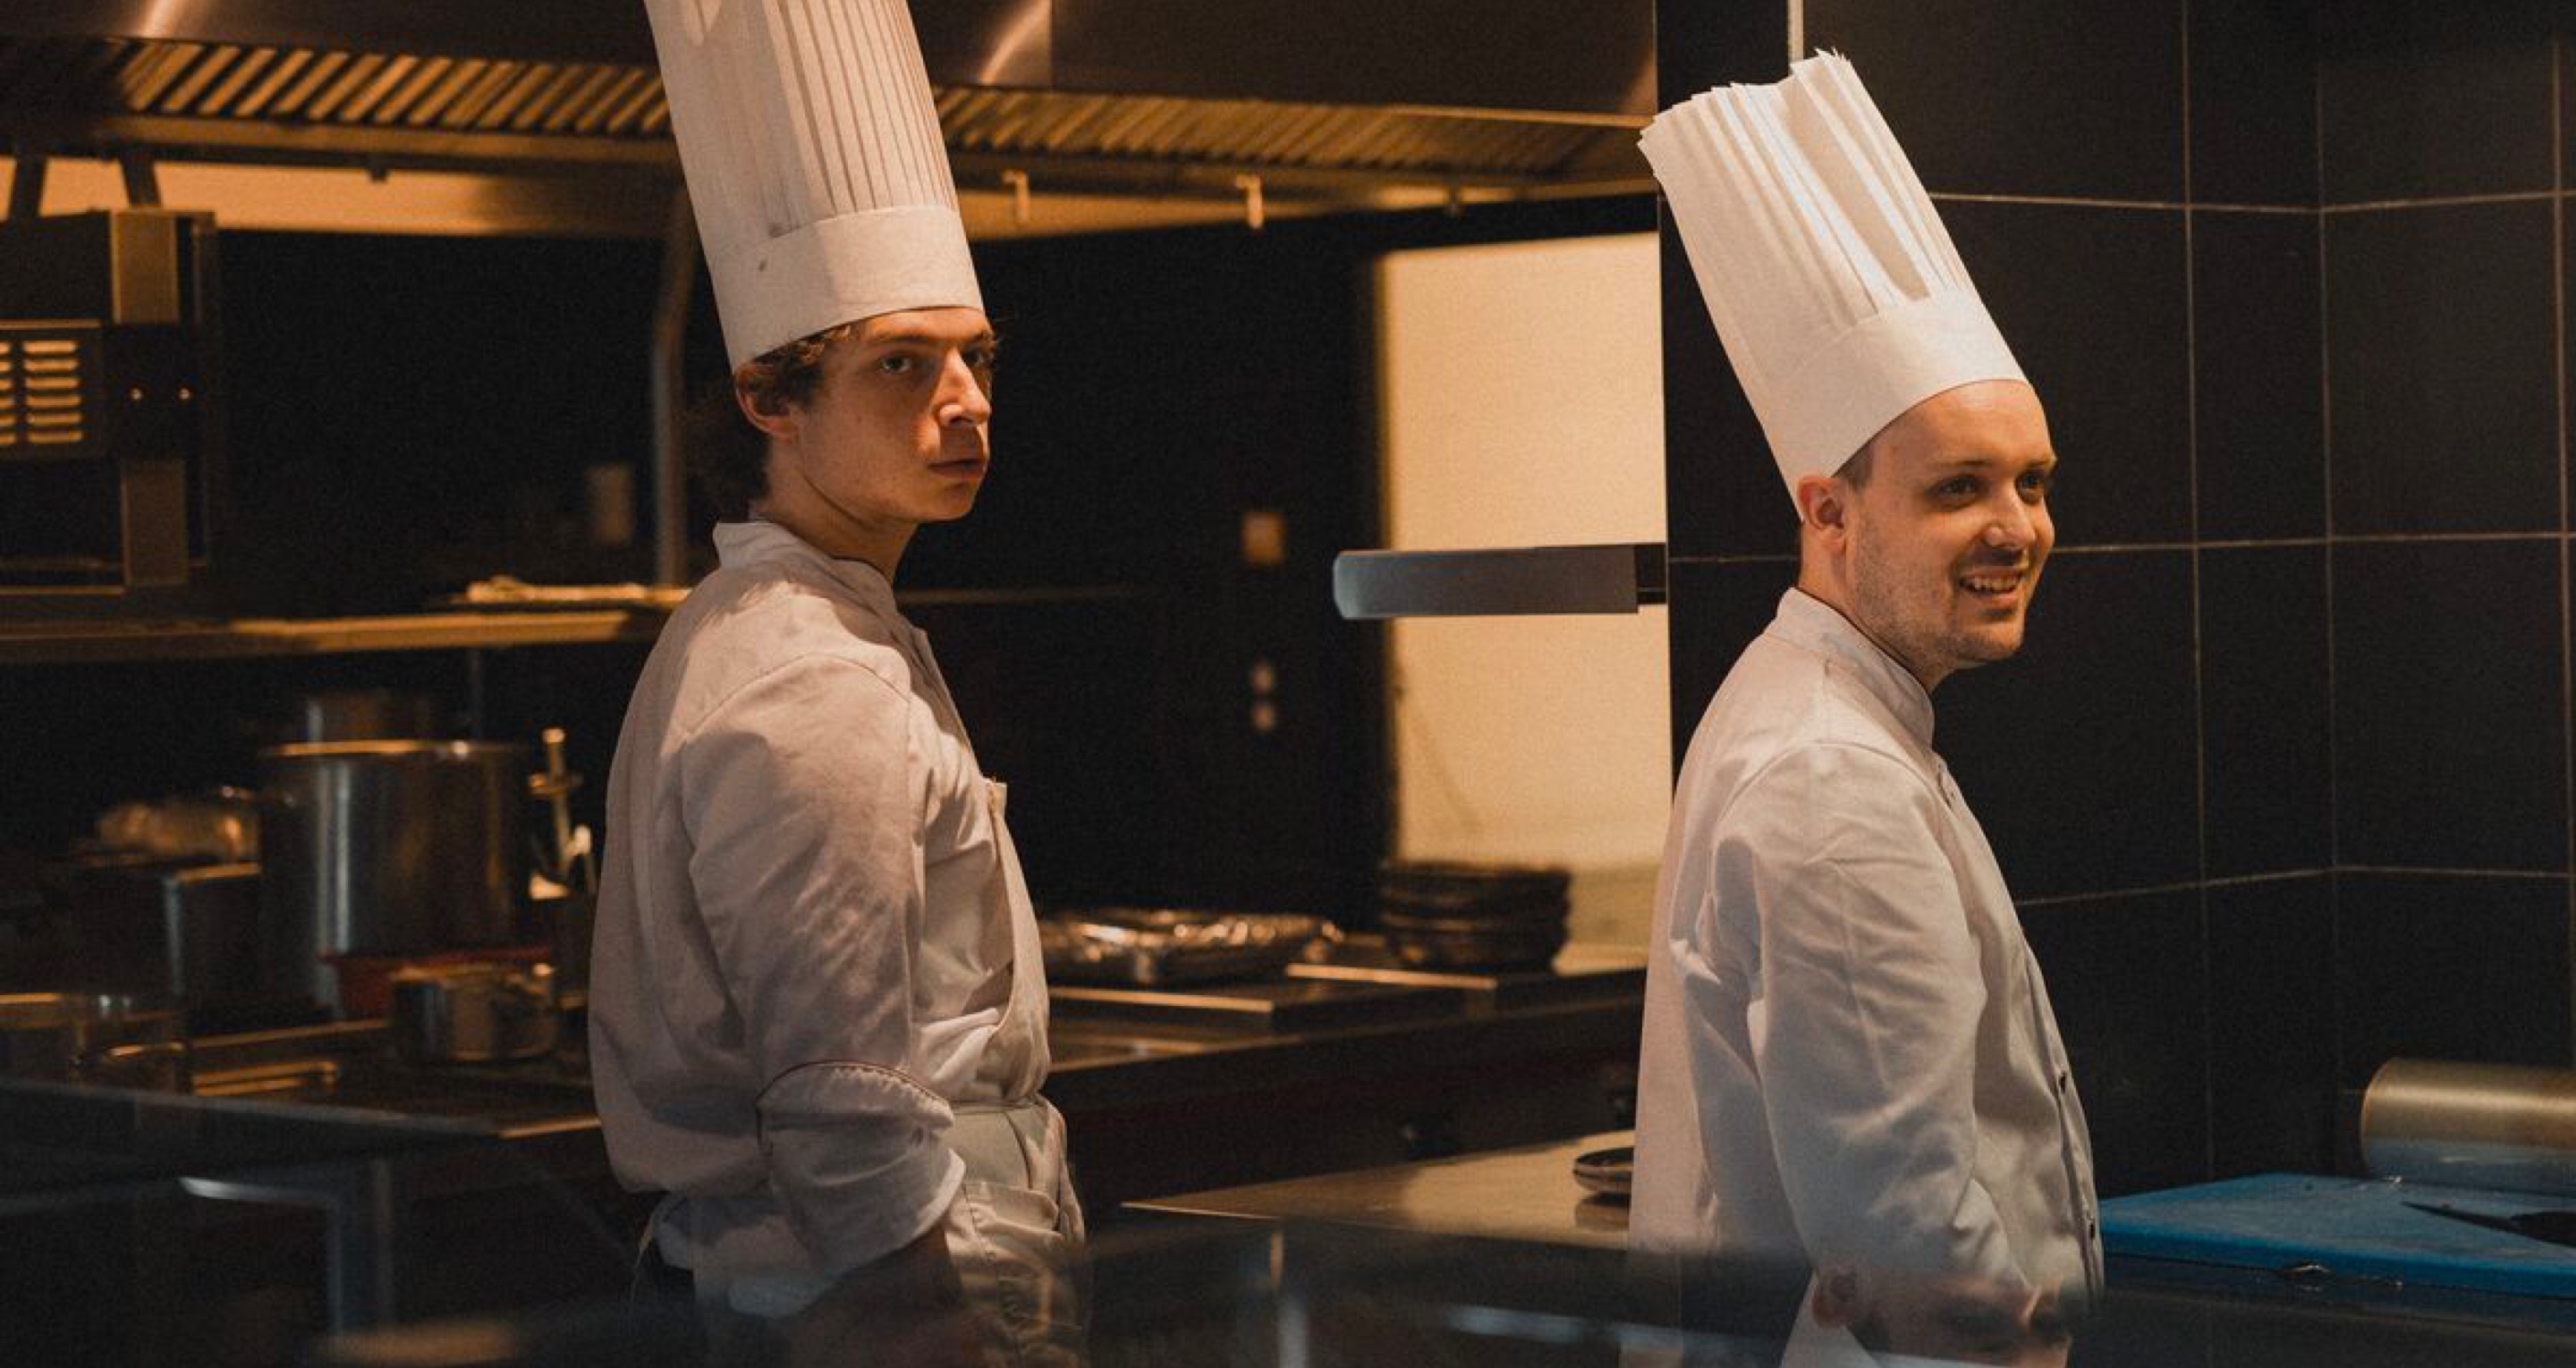 Two chefs in the kitchen